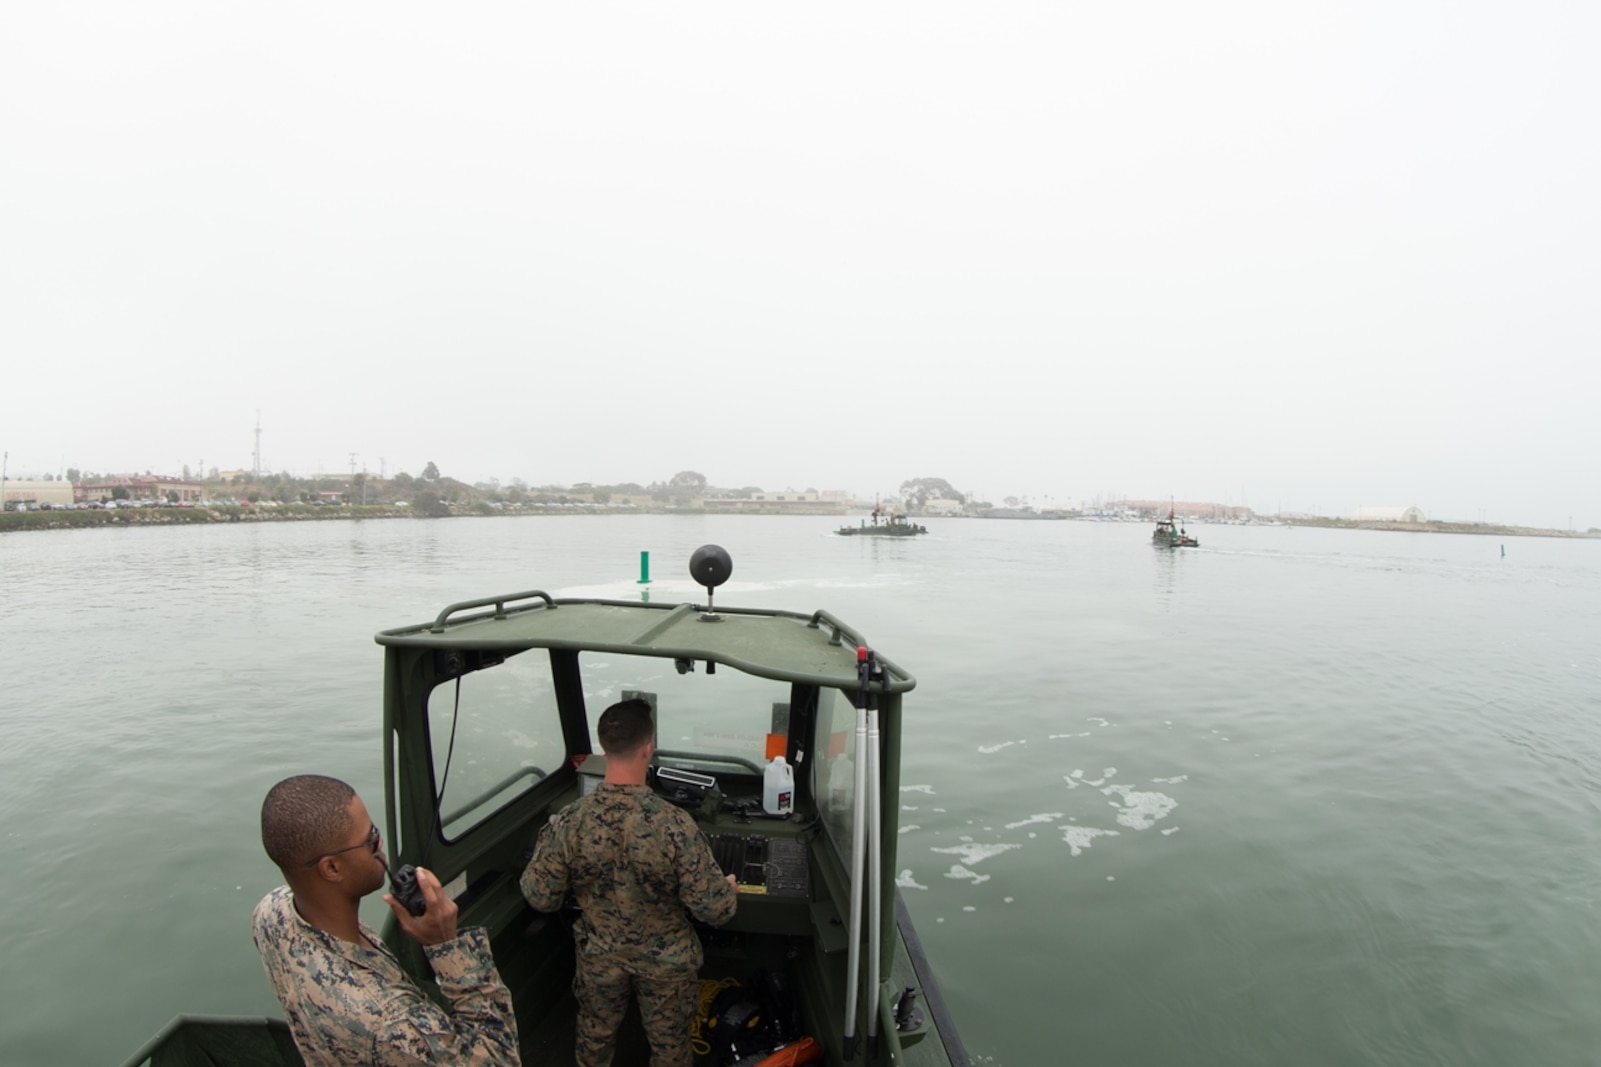 U.S. Marine Sgt. Lewis Kennedy, a combat engineer with Bridge Company, 7th Engineer Support Battalion, 1st Marine Logistics Group communicates over the radio aboard a Bridge Erection Boat (BEB) during the boat licensing course along the coast of Camp Pendleton, Calif., June 21, 2017. The BEB deploys improved ribbon bridges, which are long two-way platforms used to transport heavy equipment, such as tanks, over bodies of water. (U.S. Marine Corps photo by Lance Cpl. Timothy Shoemaker)